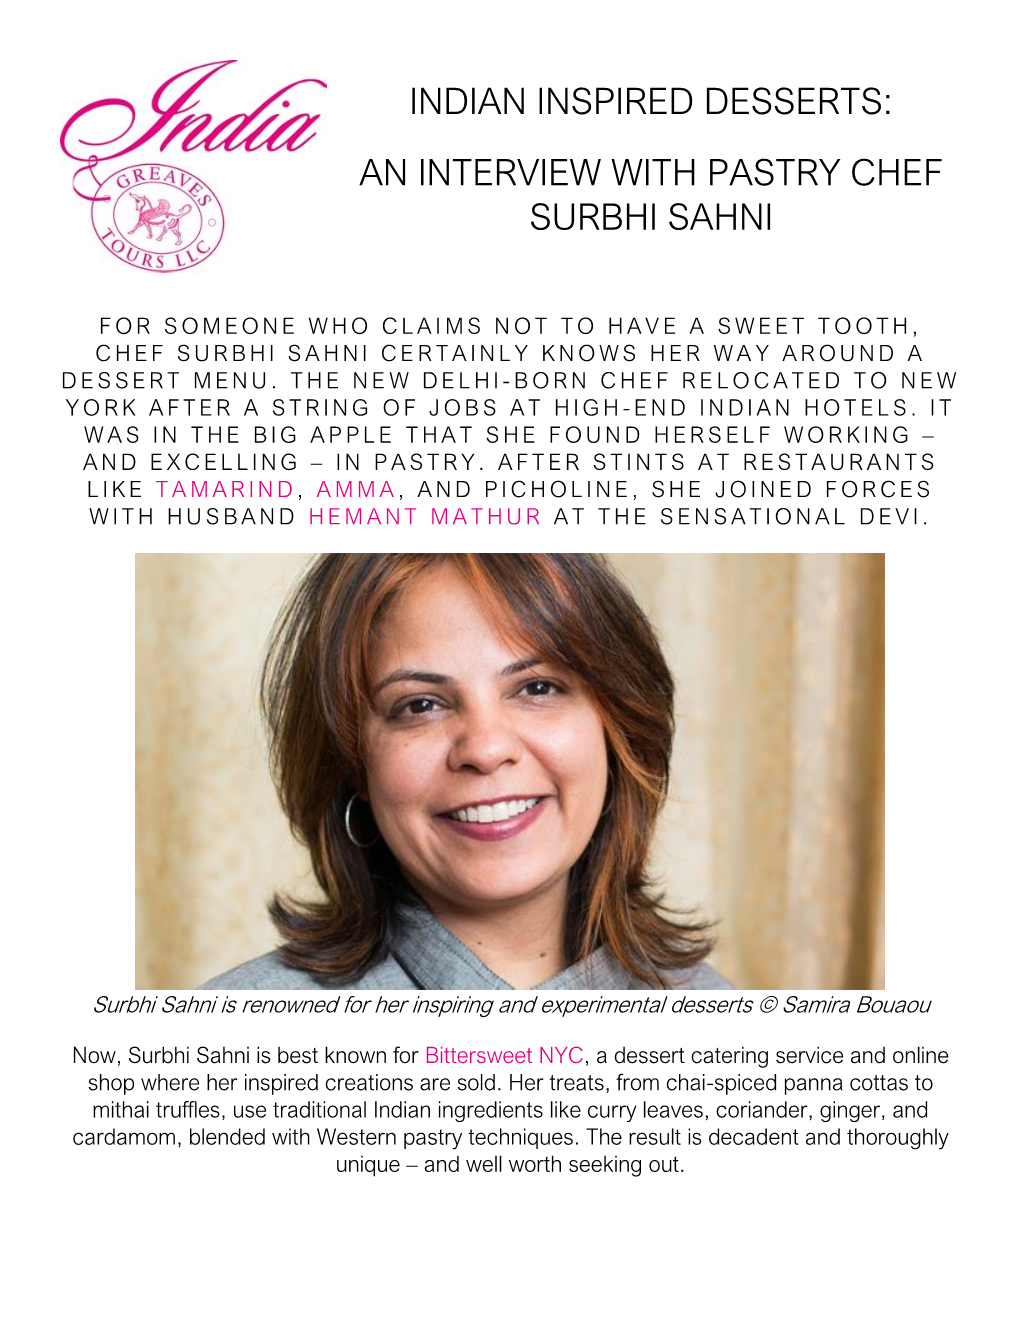 Indian Inspired Desserts: an Interview with Pastry Chef Surbhi Sahni